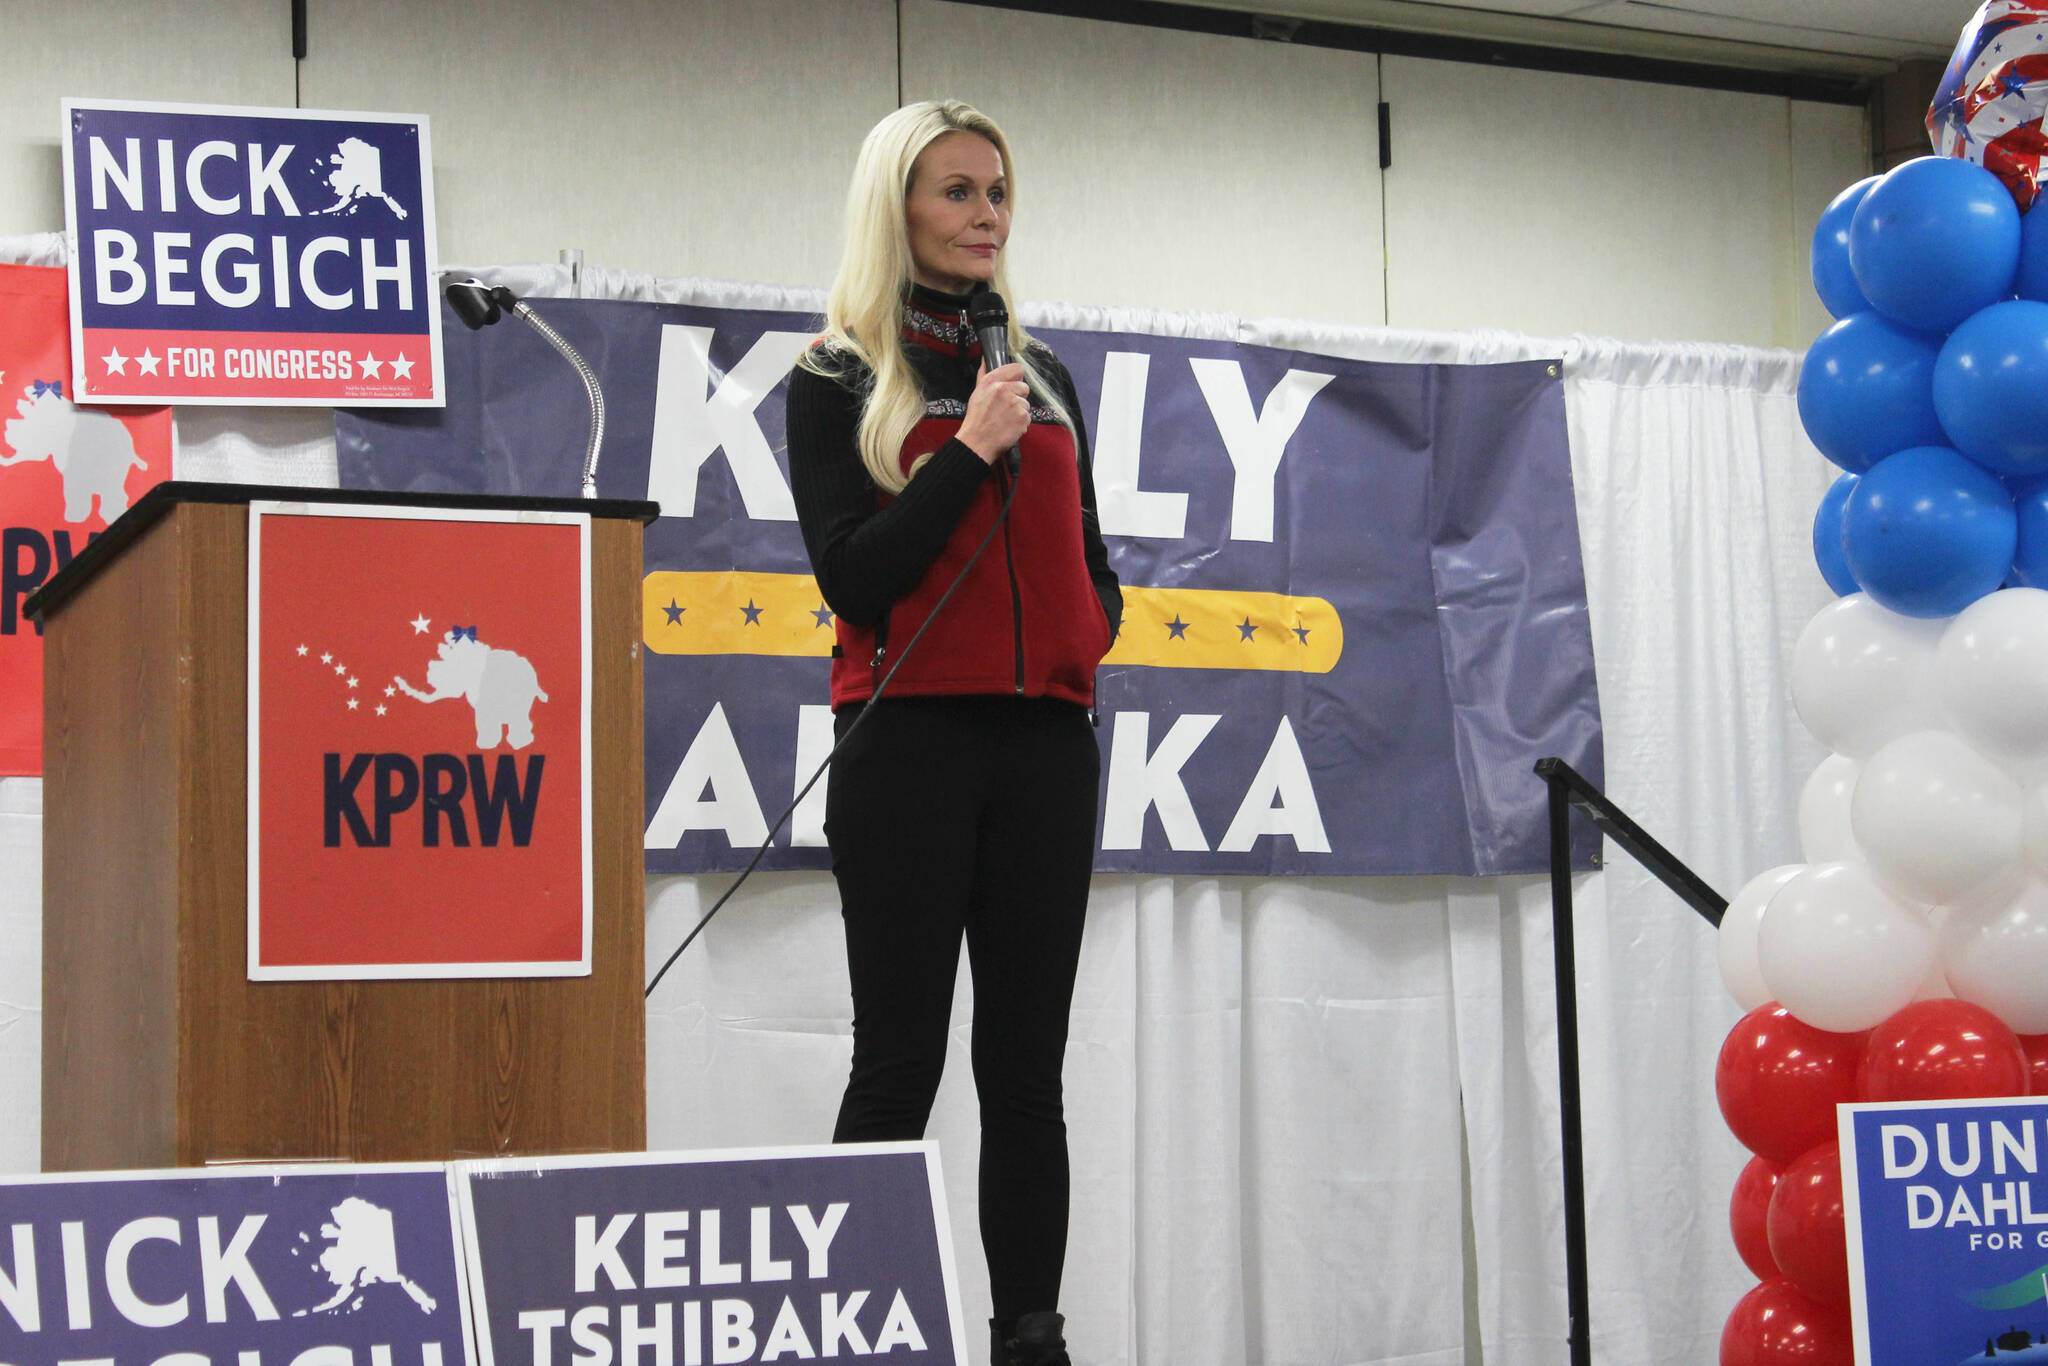 Republican U.S. Senate candidate Kelly Tshibaka speaks at a “Get Out the Vote” rally hosted by the Kenai Peninsula Republican Women at the Soldotna Regional Sports Complex on Tuesday, Oct. 18, 2022, in Soldotna, Alaska. (Ashlyn O’Hara/Peninsula Clarion)